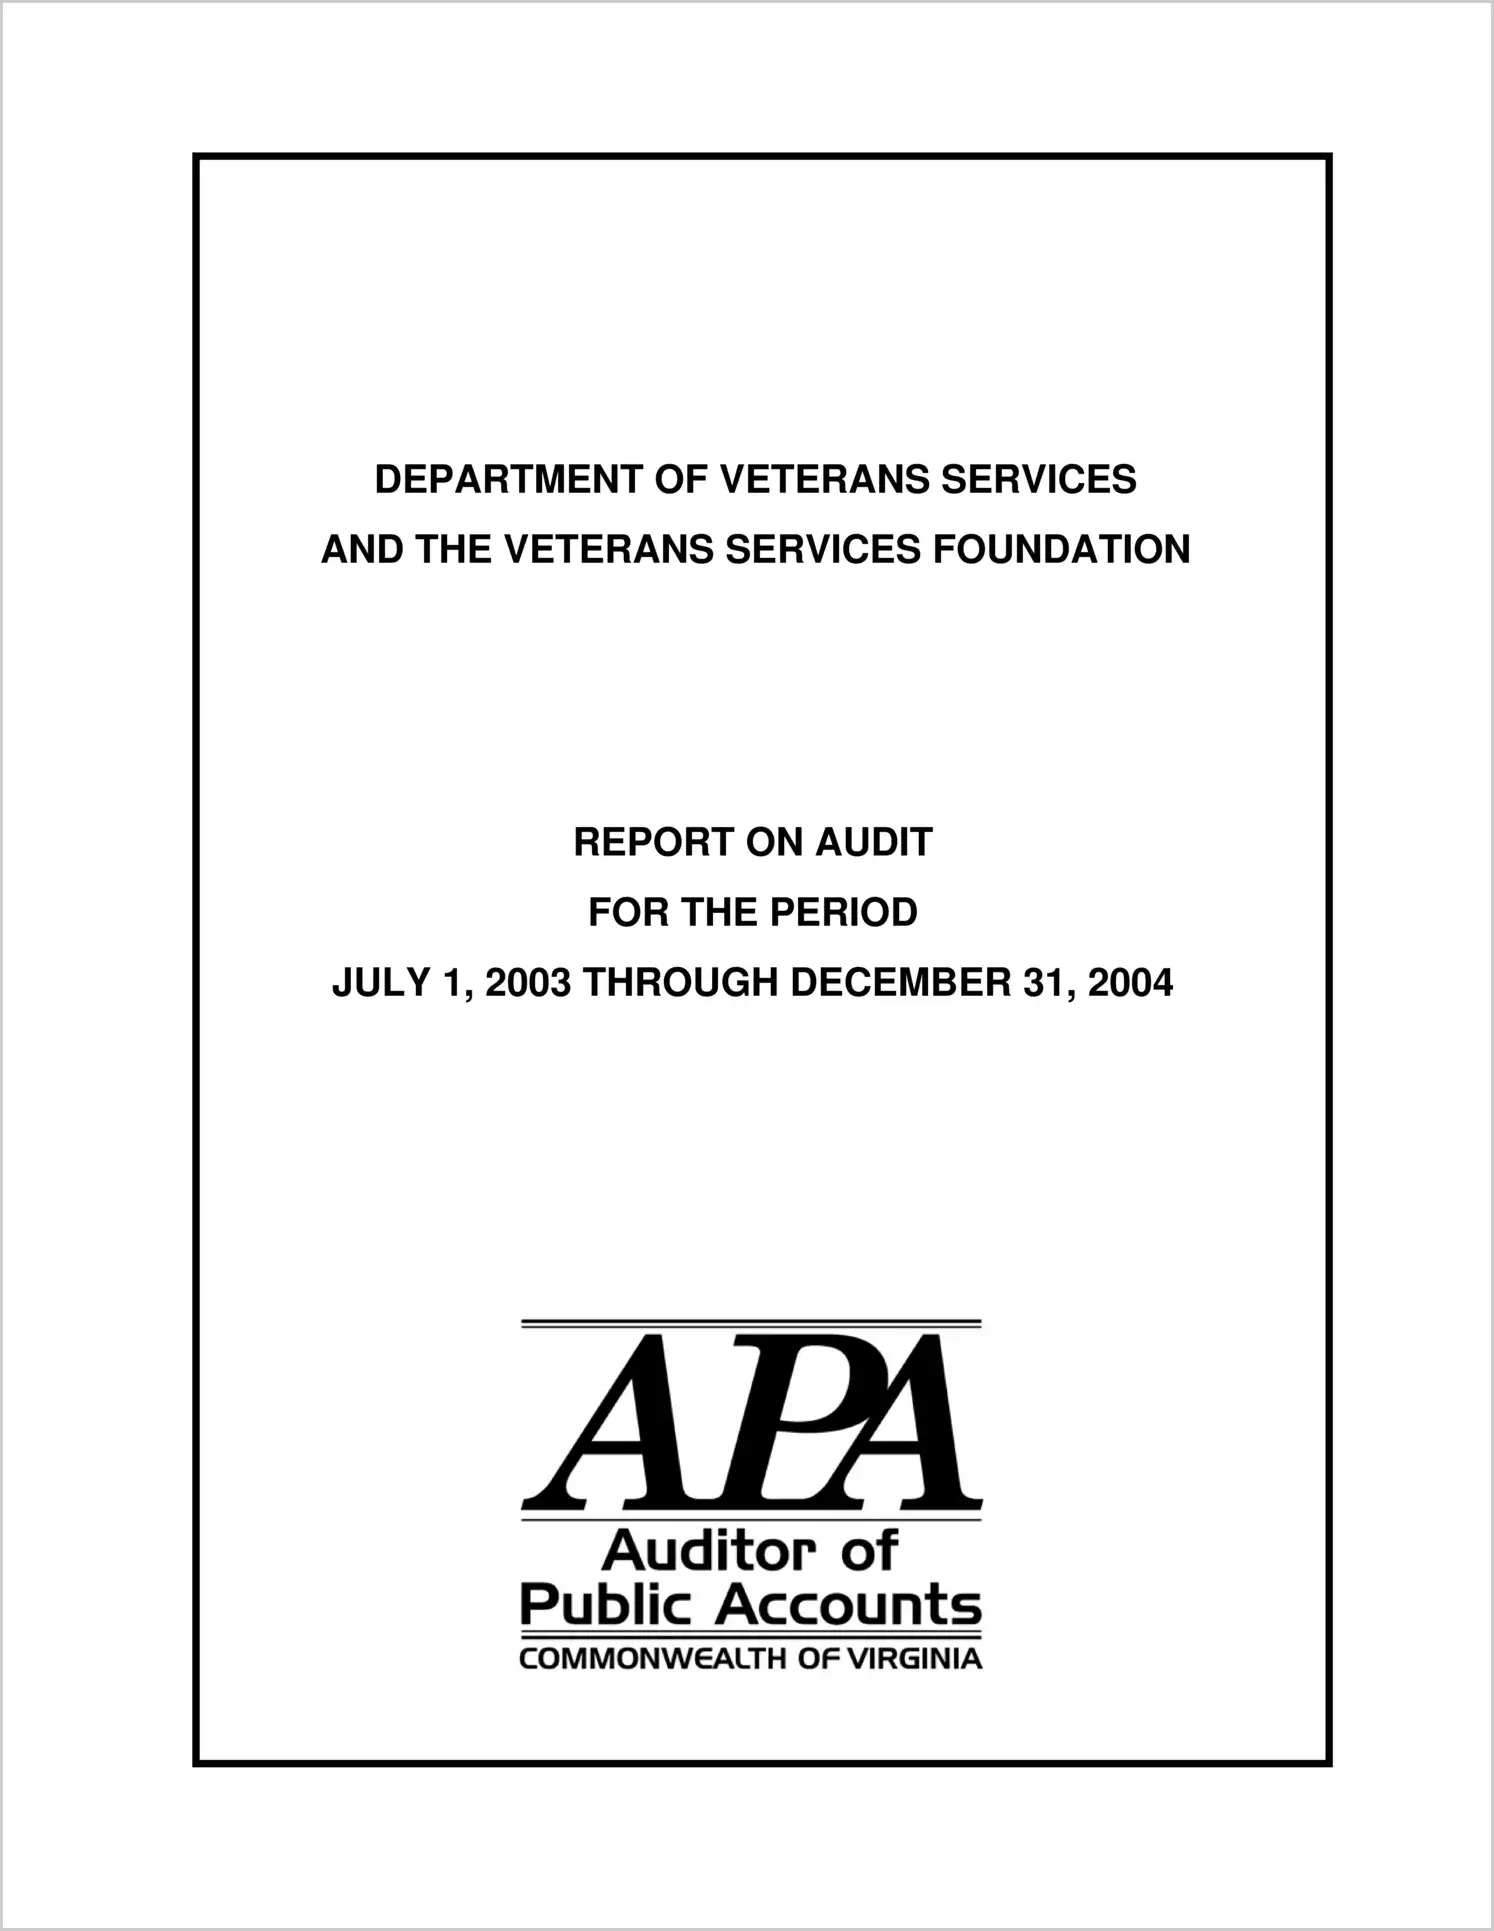 Department of Veterans Services and the Veterans Services Foundation for the period July 1, 2003 through December 31, 2004